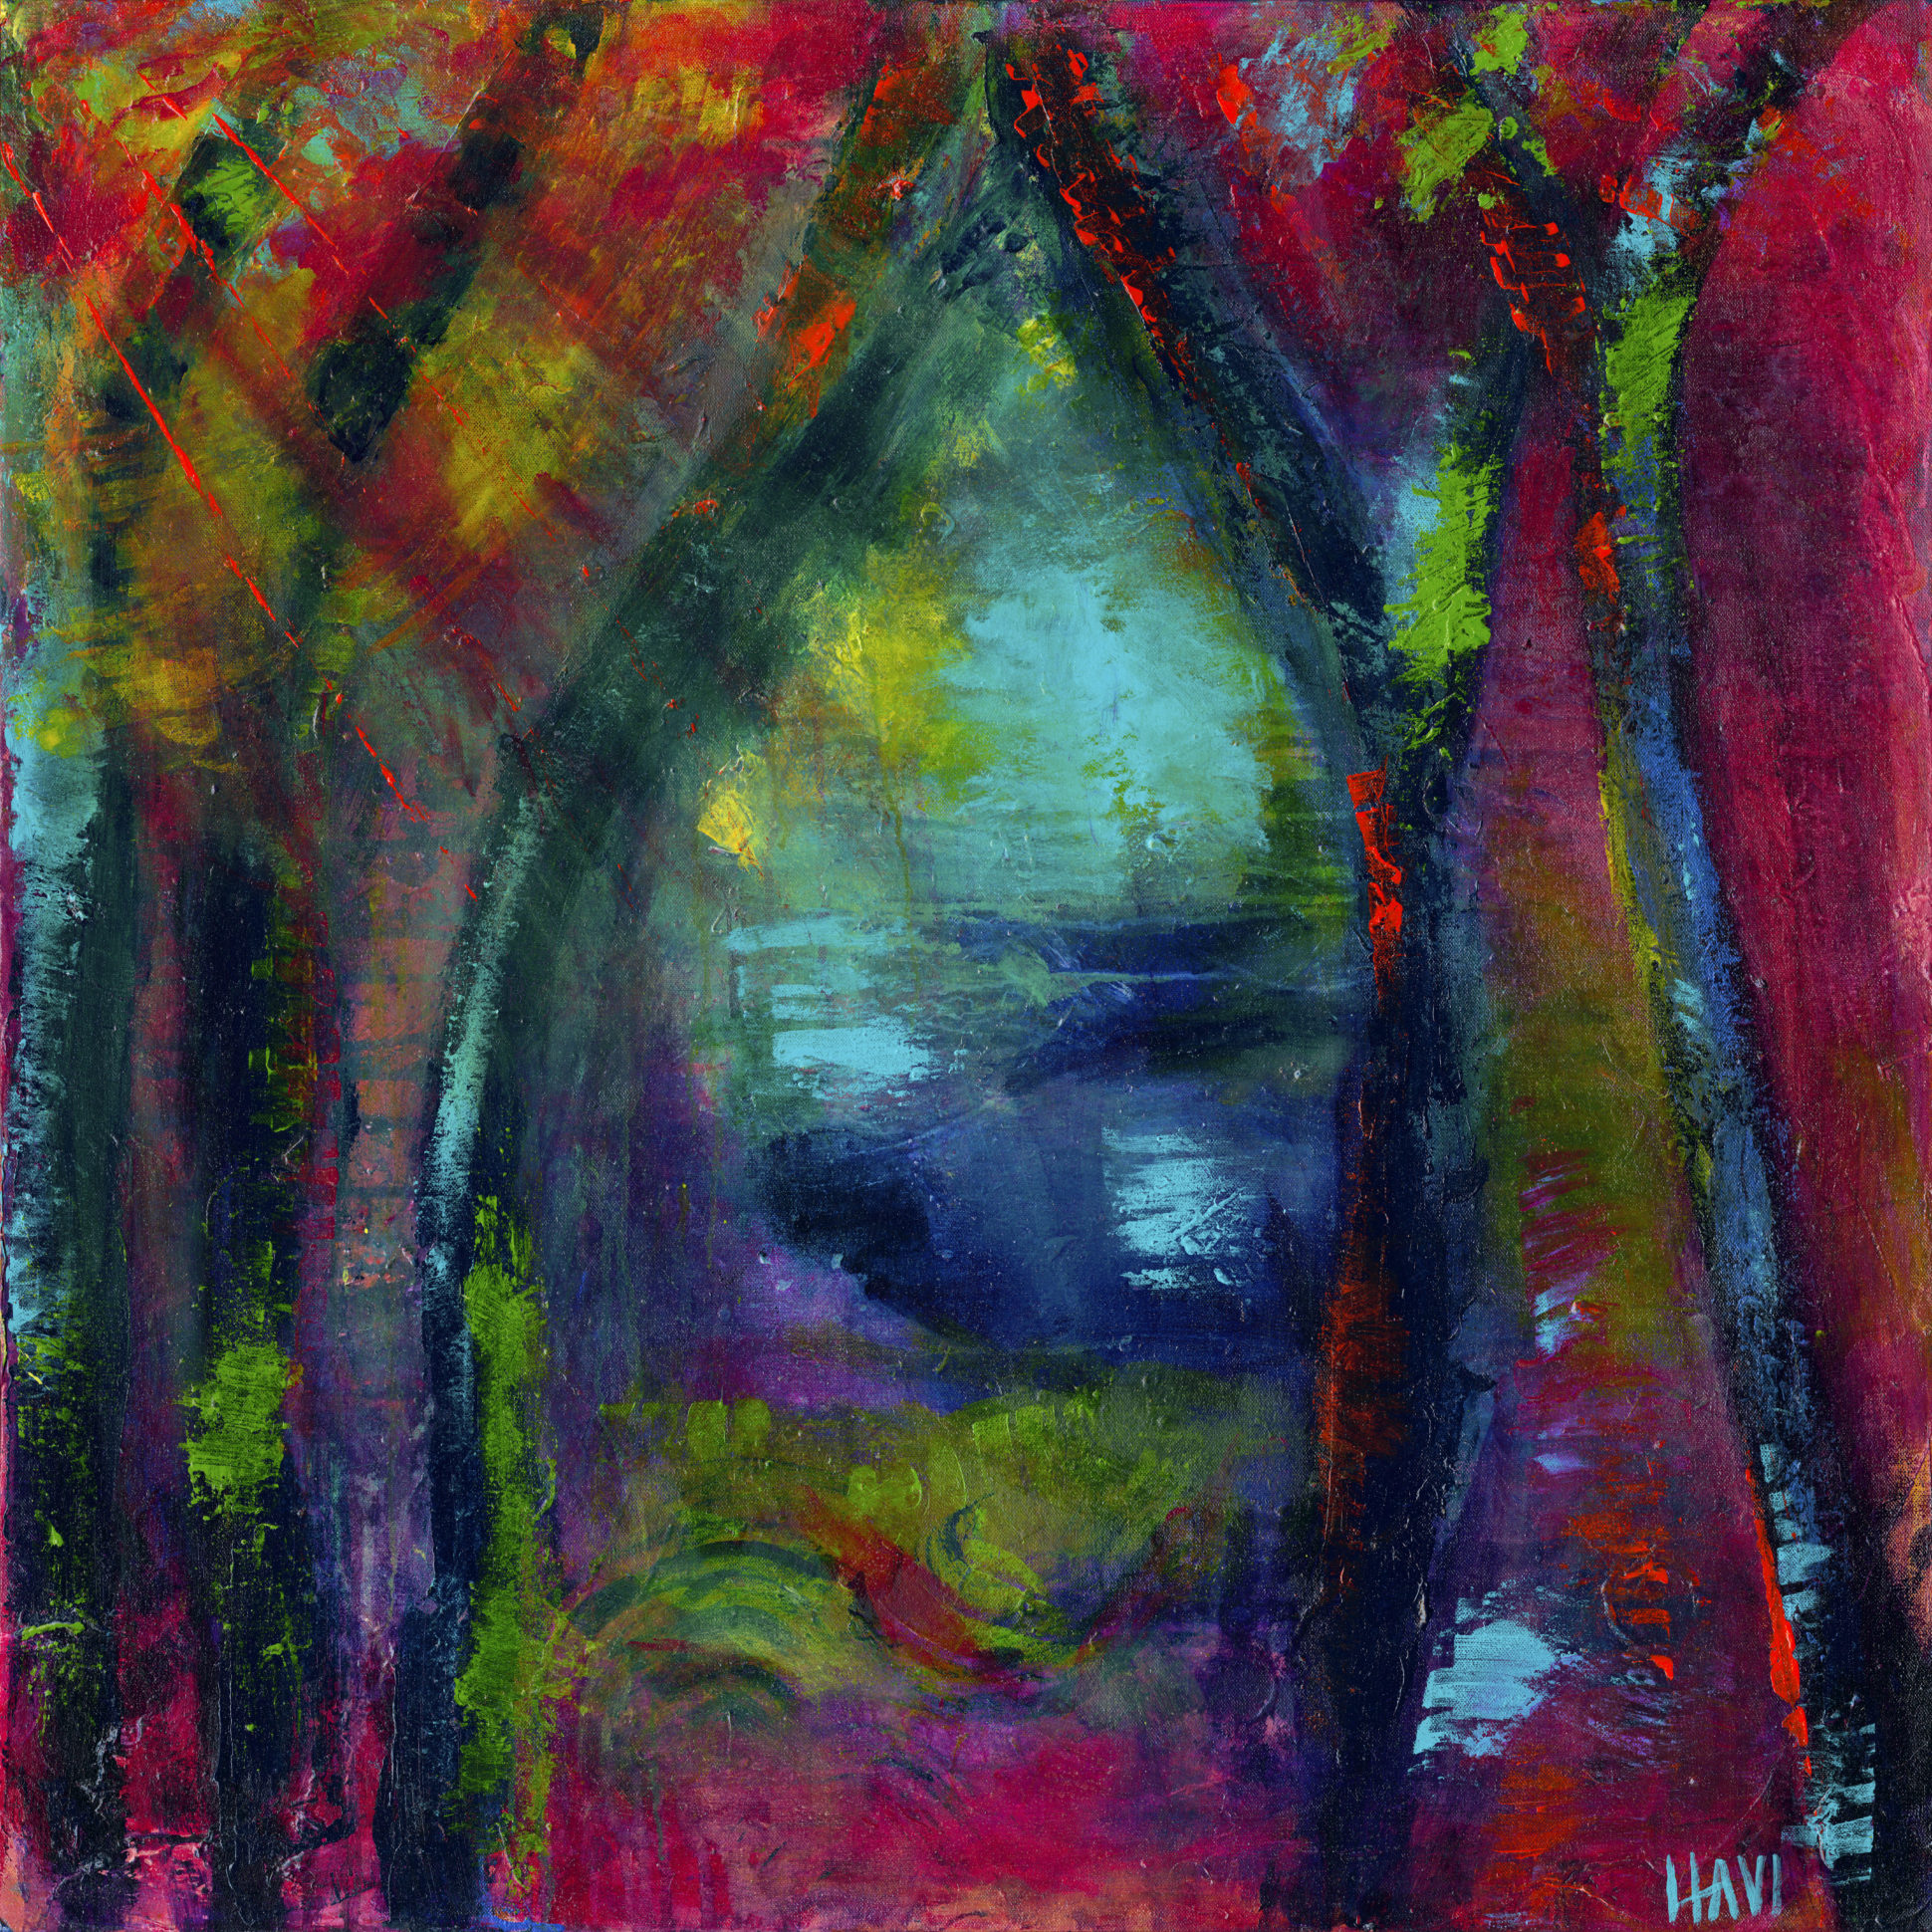 Sanctuary. Acrylic on canvas 36 x36. Entering into the temenos of our soul, the temenos of nature
$900